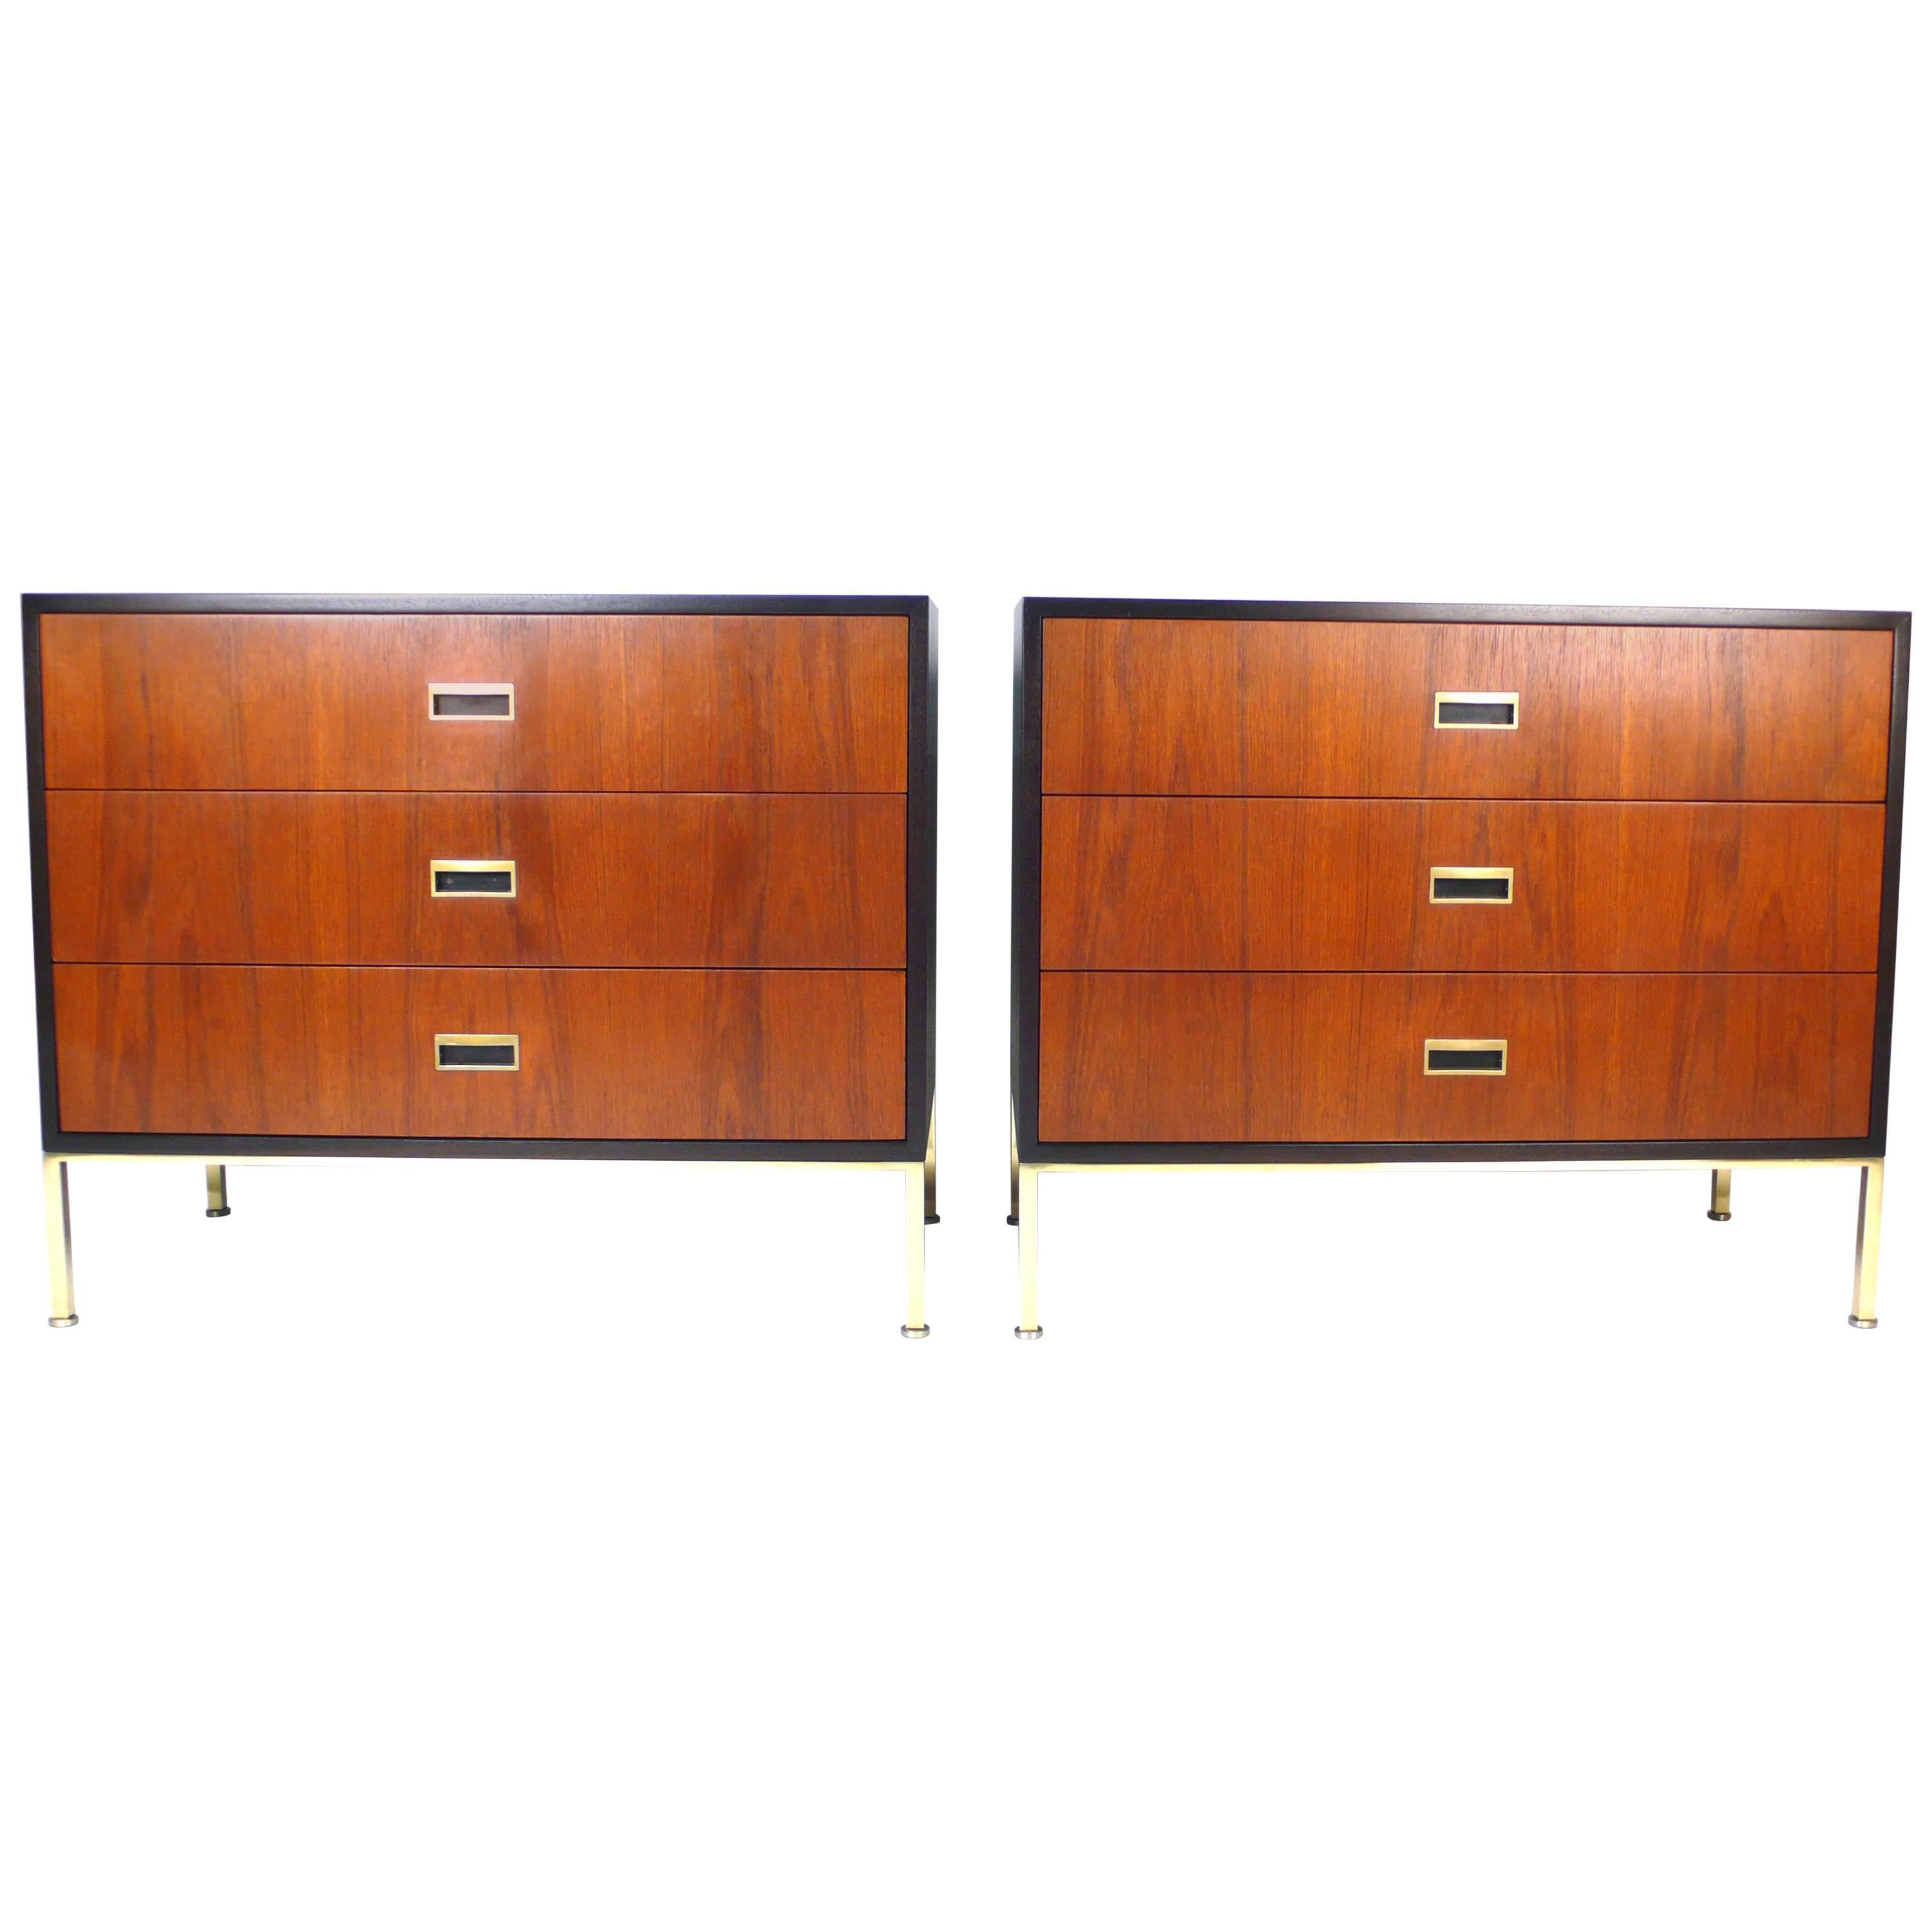 Matching Pair of Three-Drawer Chests by Harvey Probber